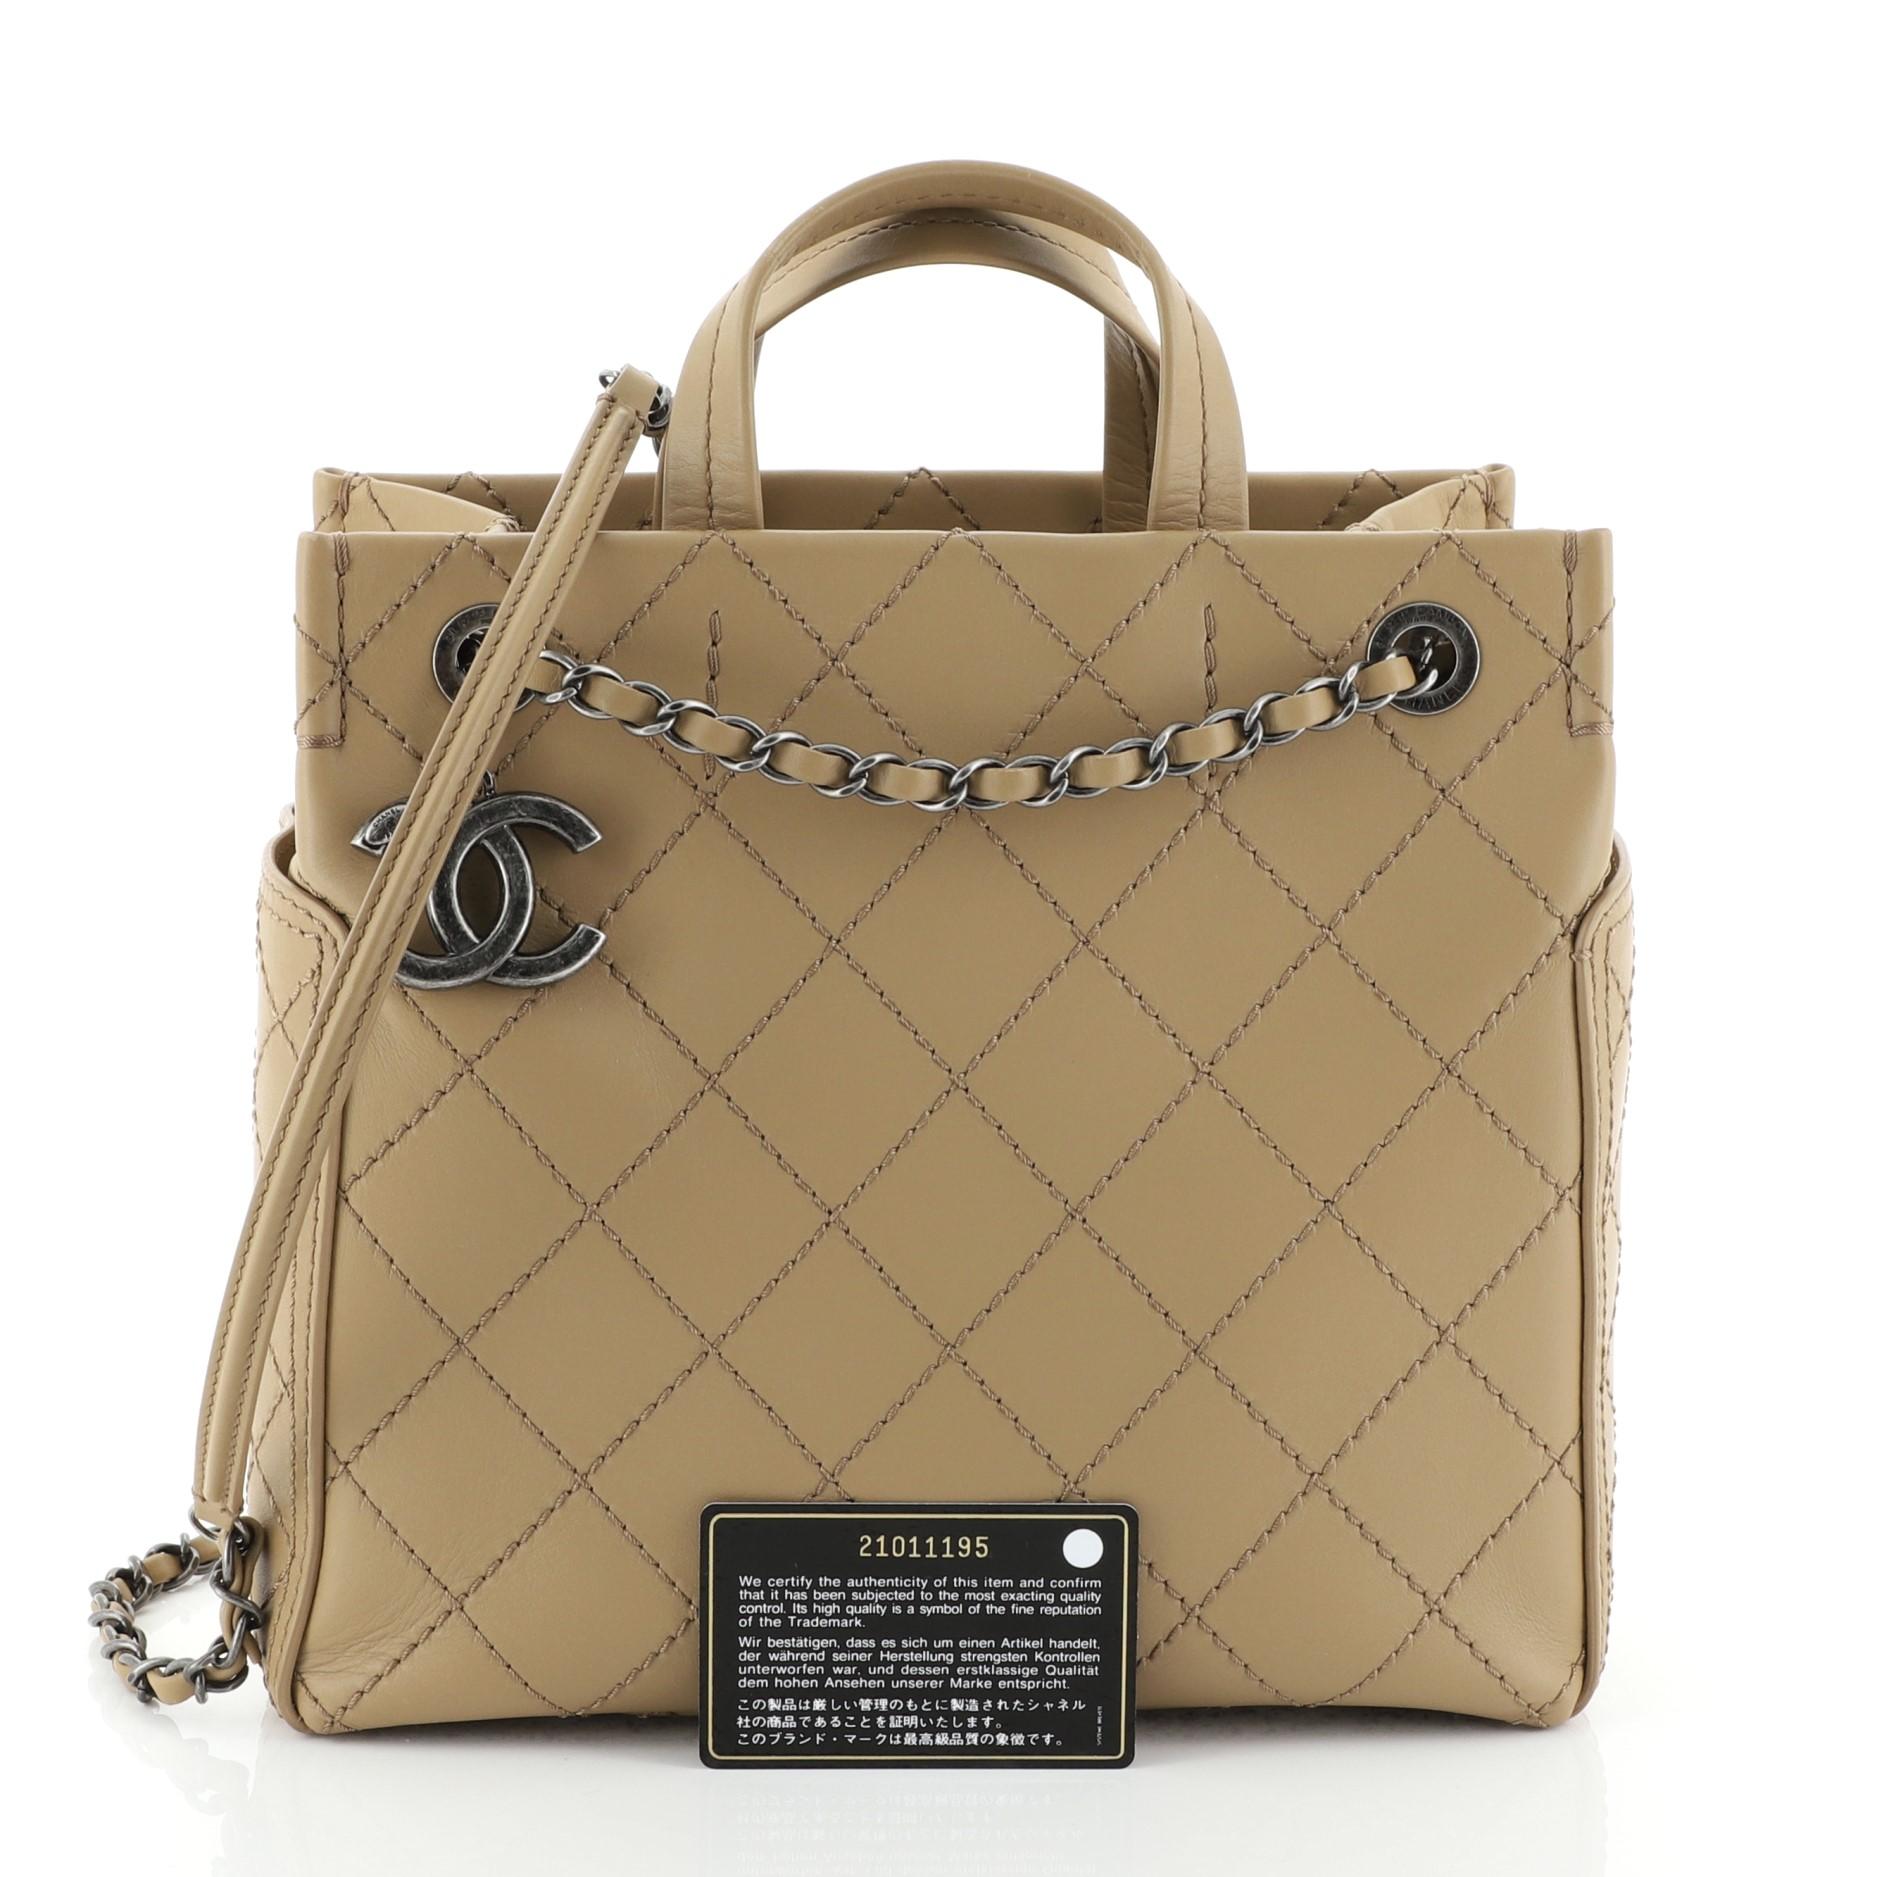 This Chanel CC Pocket Tote Quilted Calfskin Small, crafted in neutral quilted calfskin leather, features dual top handles, woven-in leather chain straps with leather pads, exterior side pockets, and aged silver-tone hardware. Its wide open top